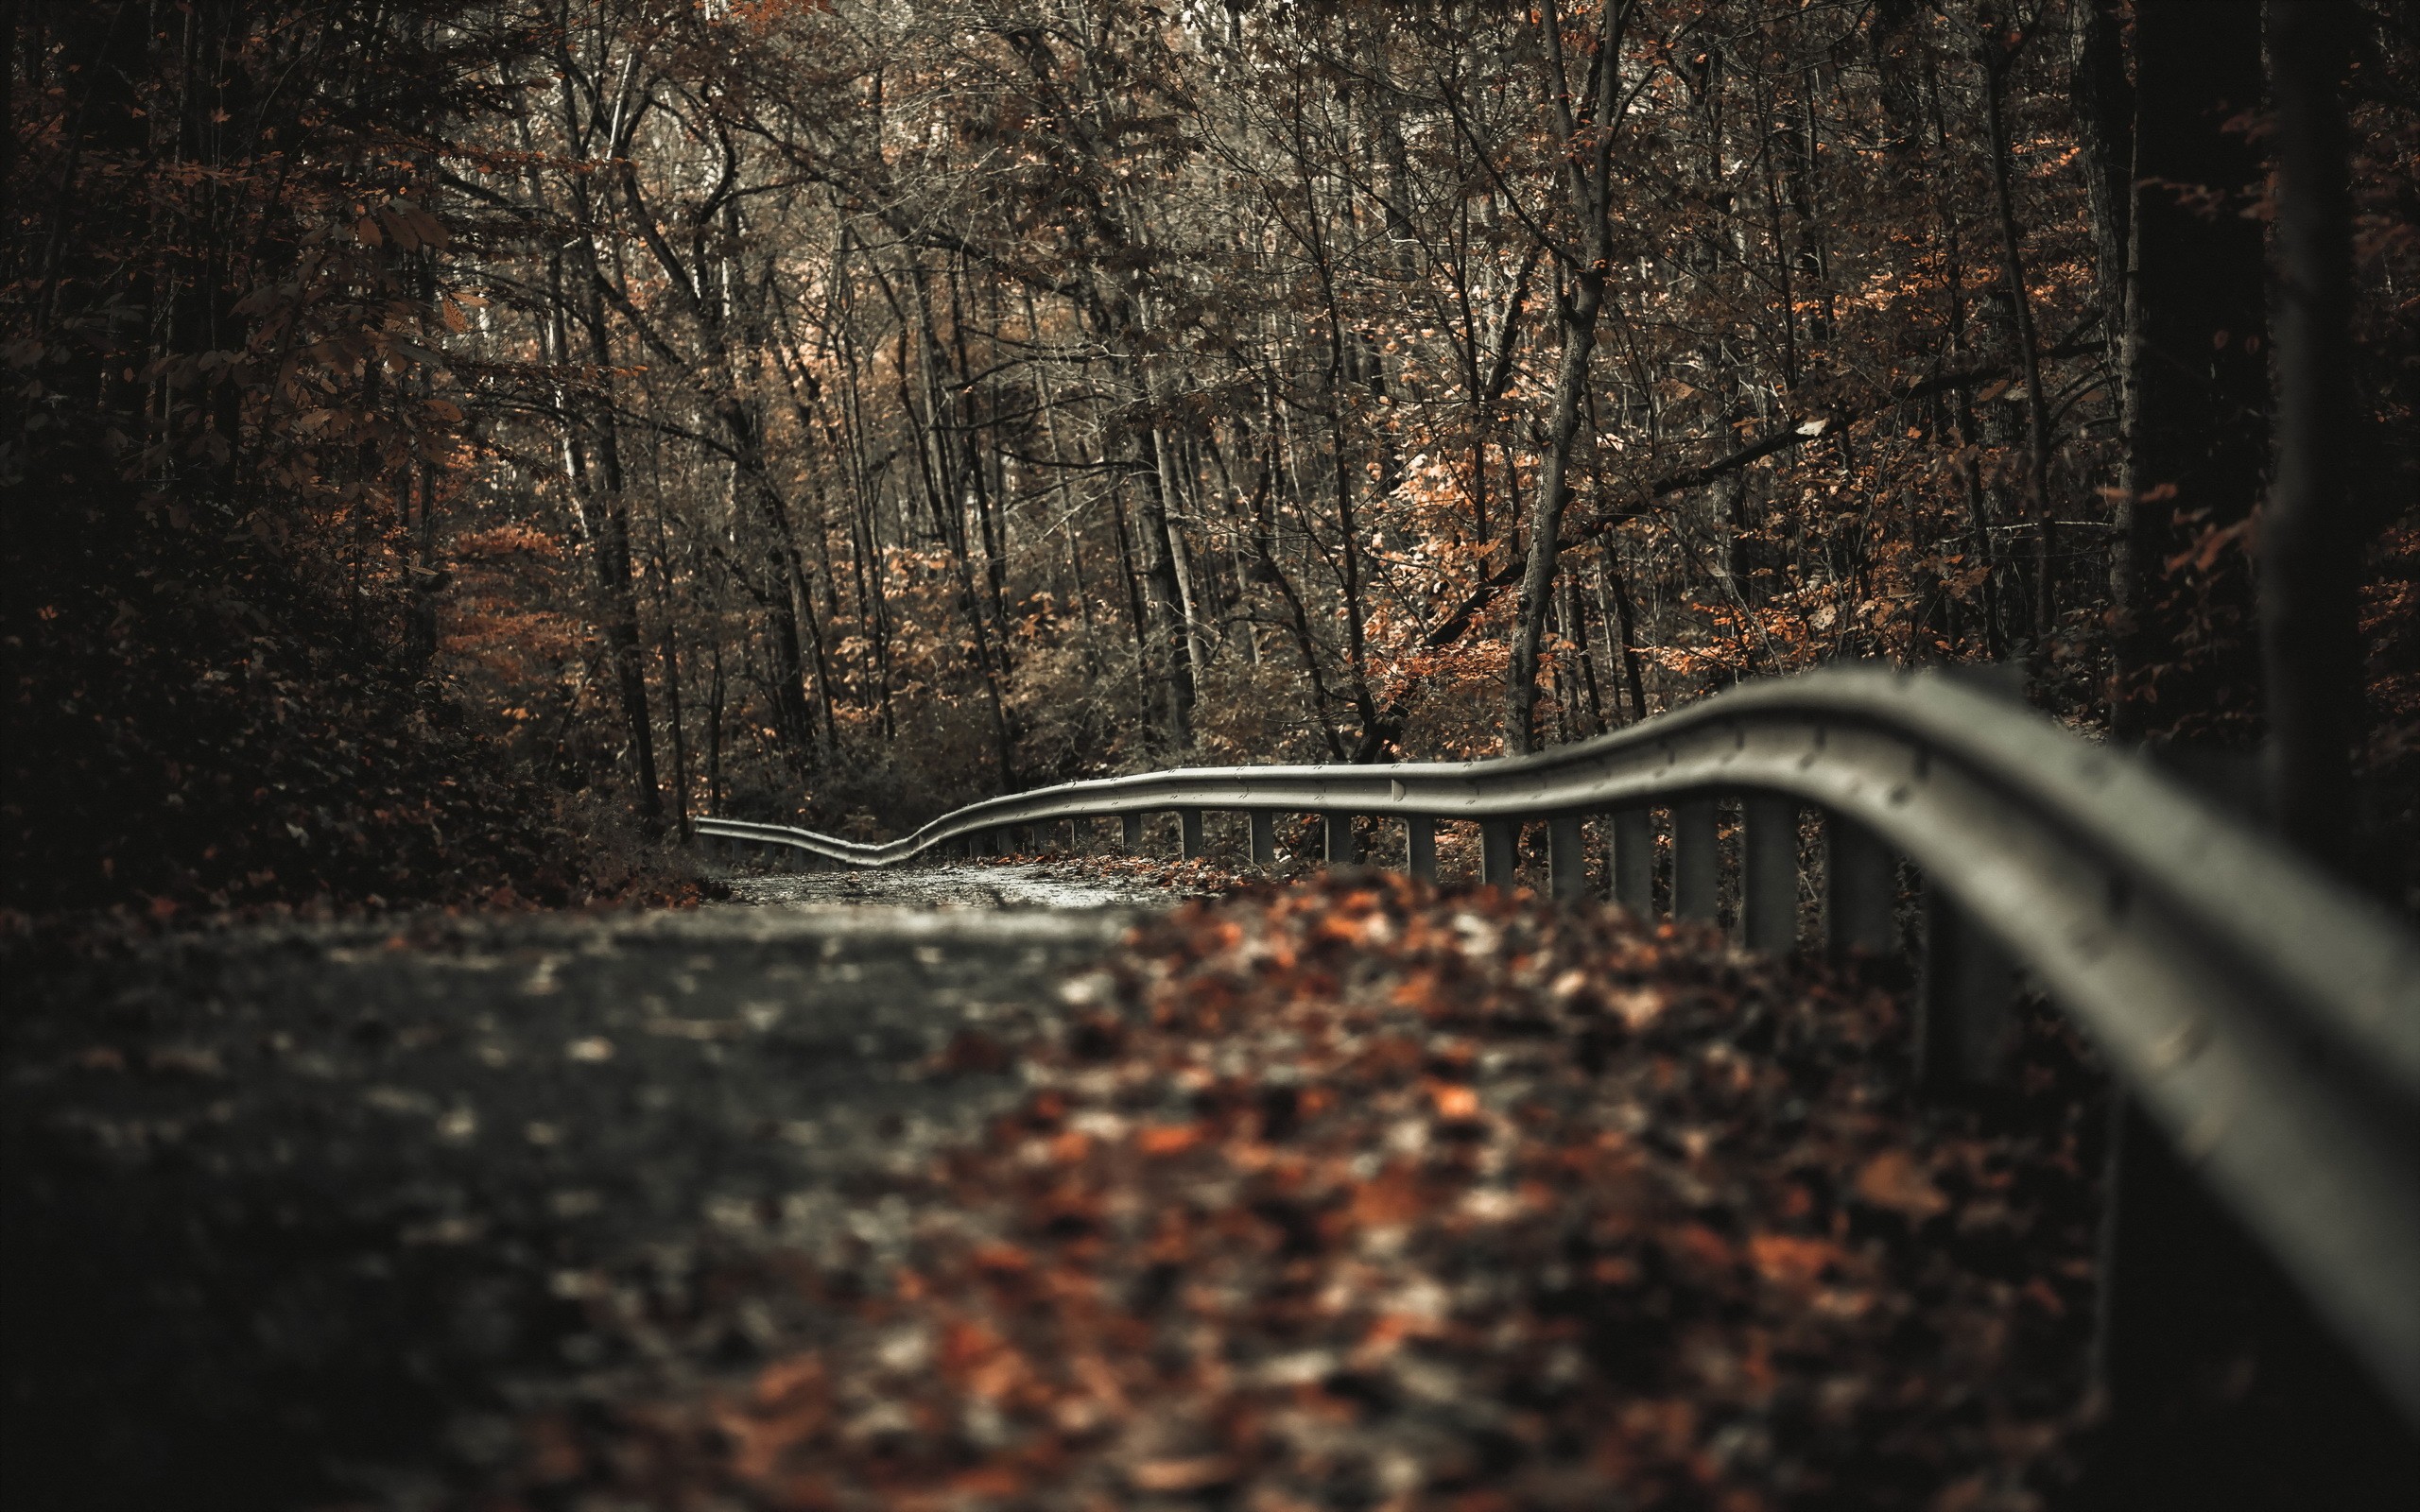 General 2560x1600 road trees fall landscape depth of field fence nature